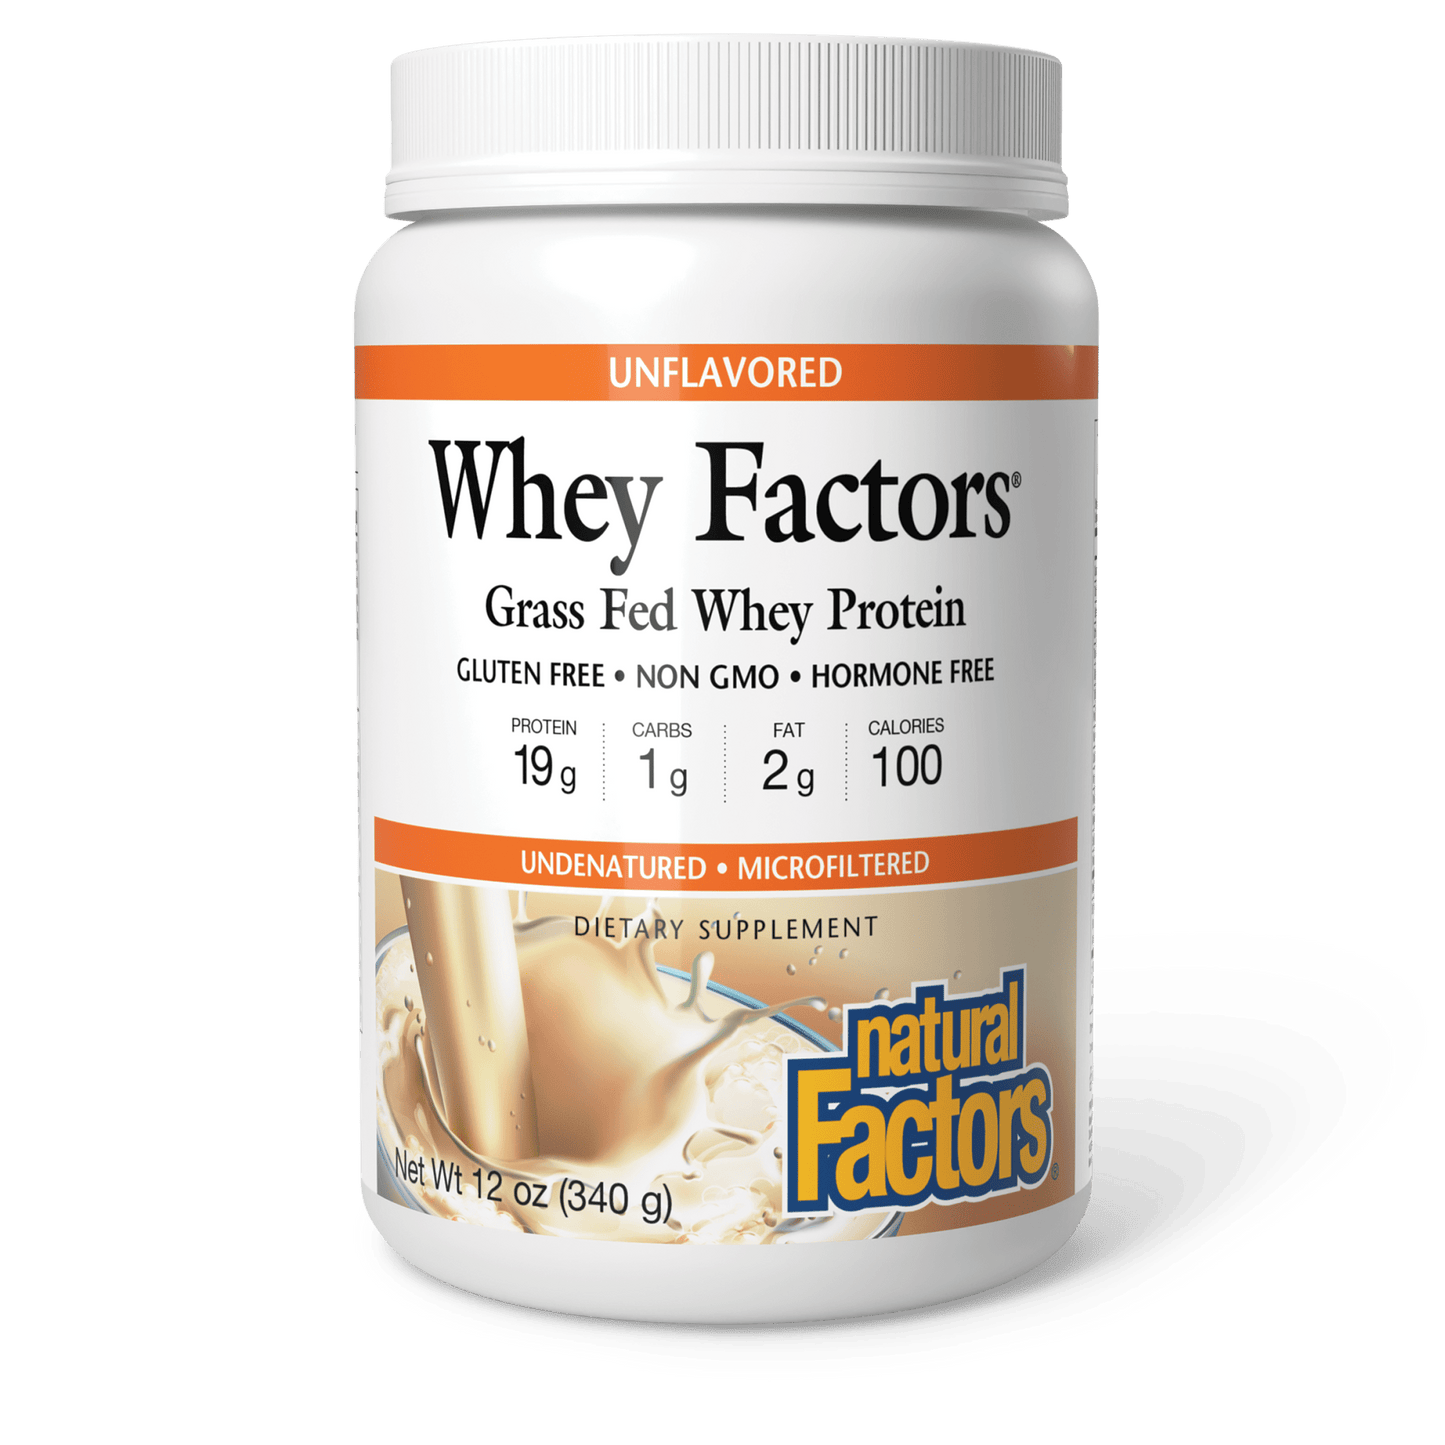 Grass Fed Whey Protein|variant|hi-res|2929U